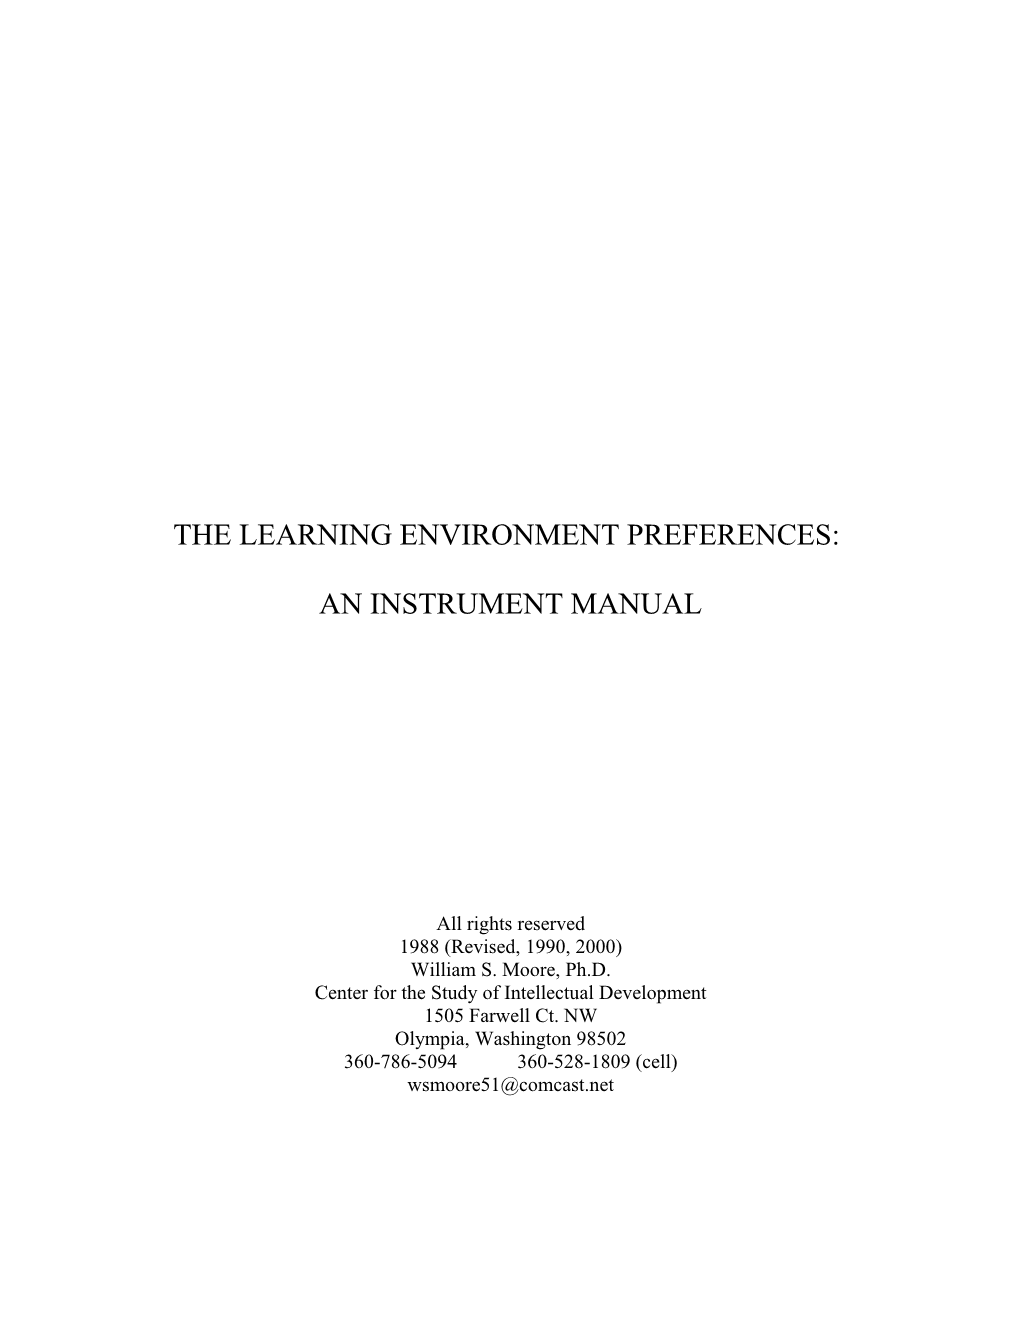 The Learning Environment Preferences: